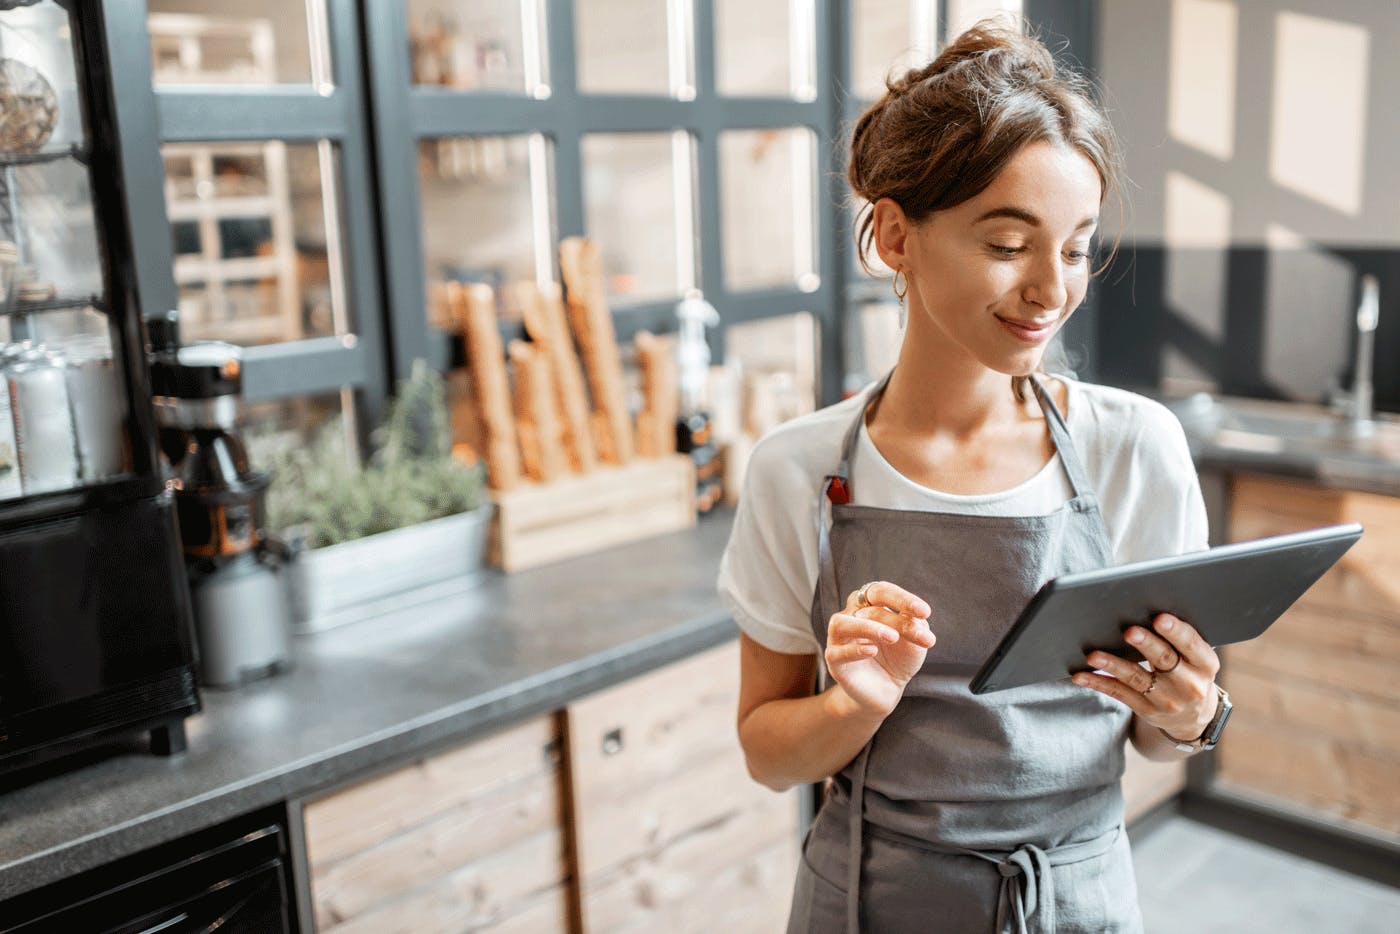 Image of a restaurant staff smiling and looking at the tablet in her hands